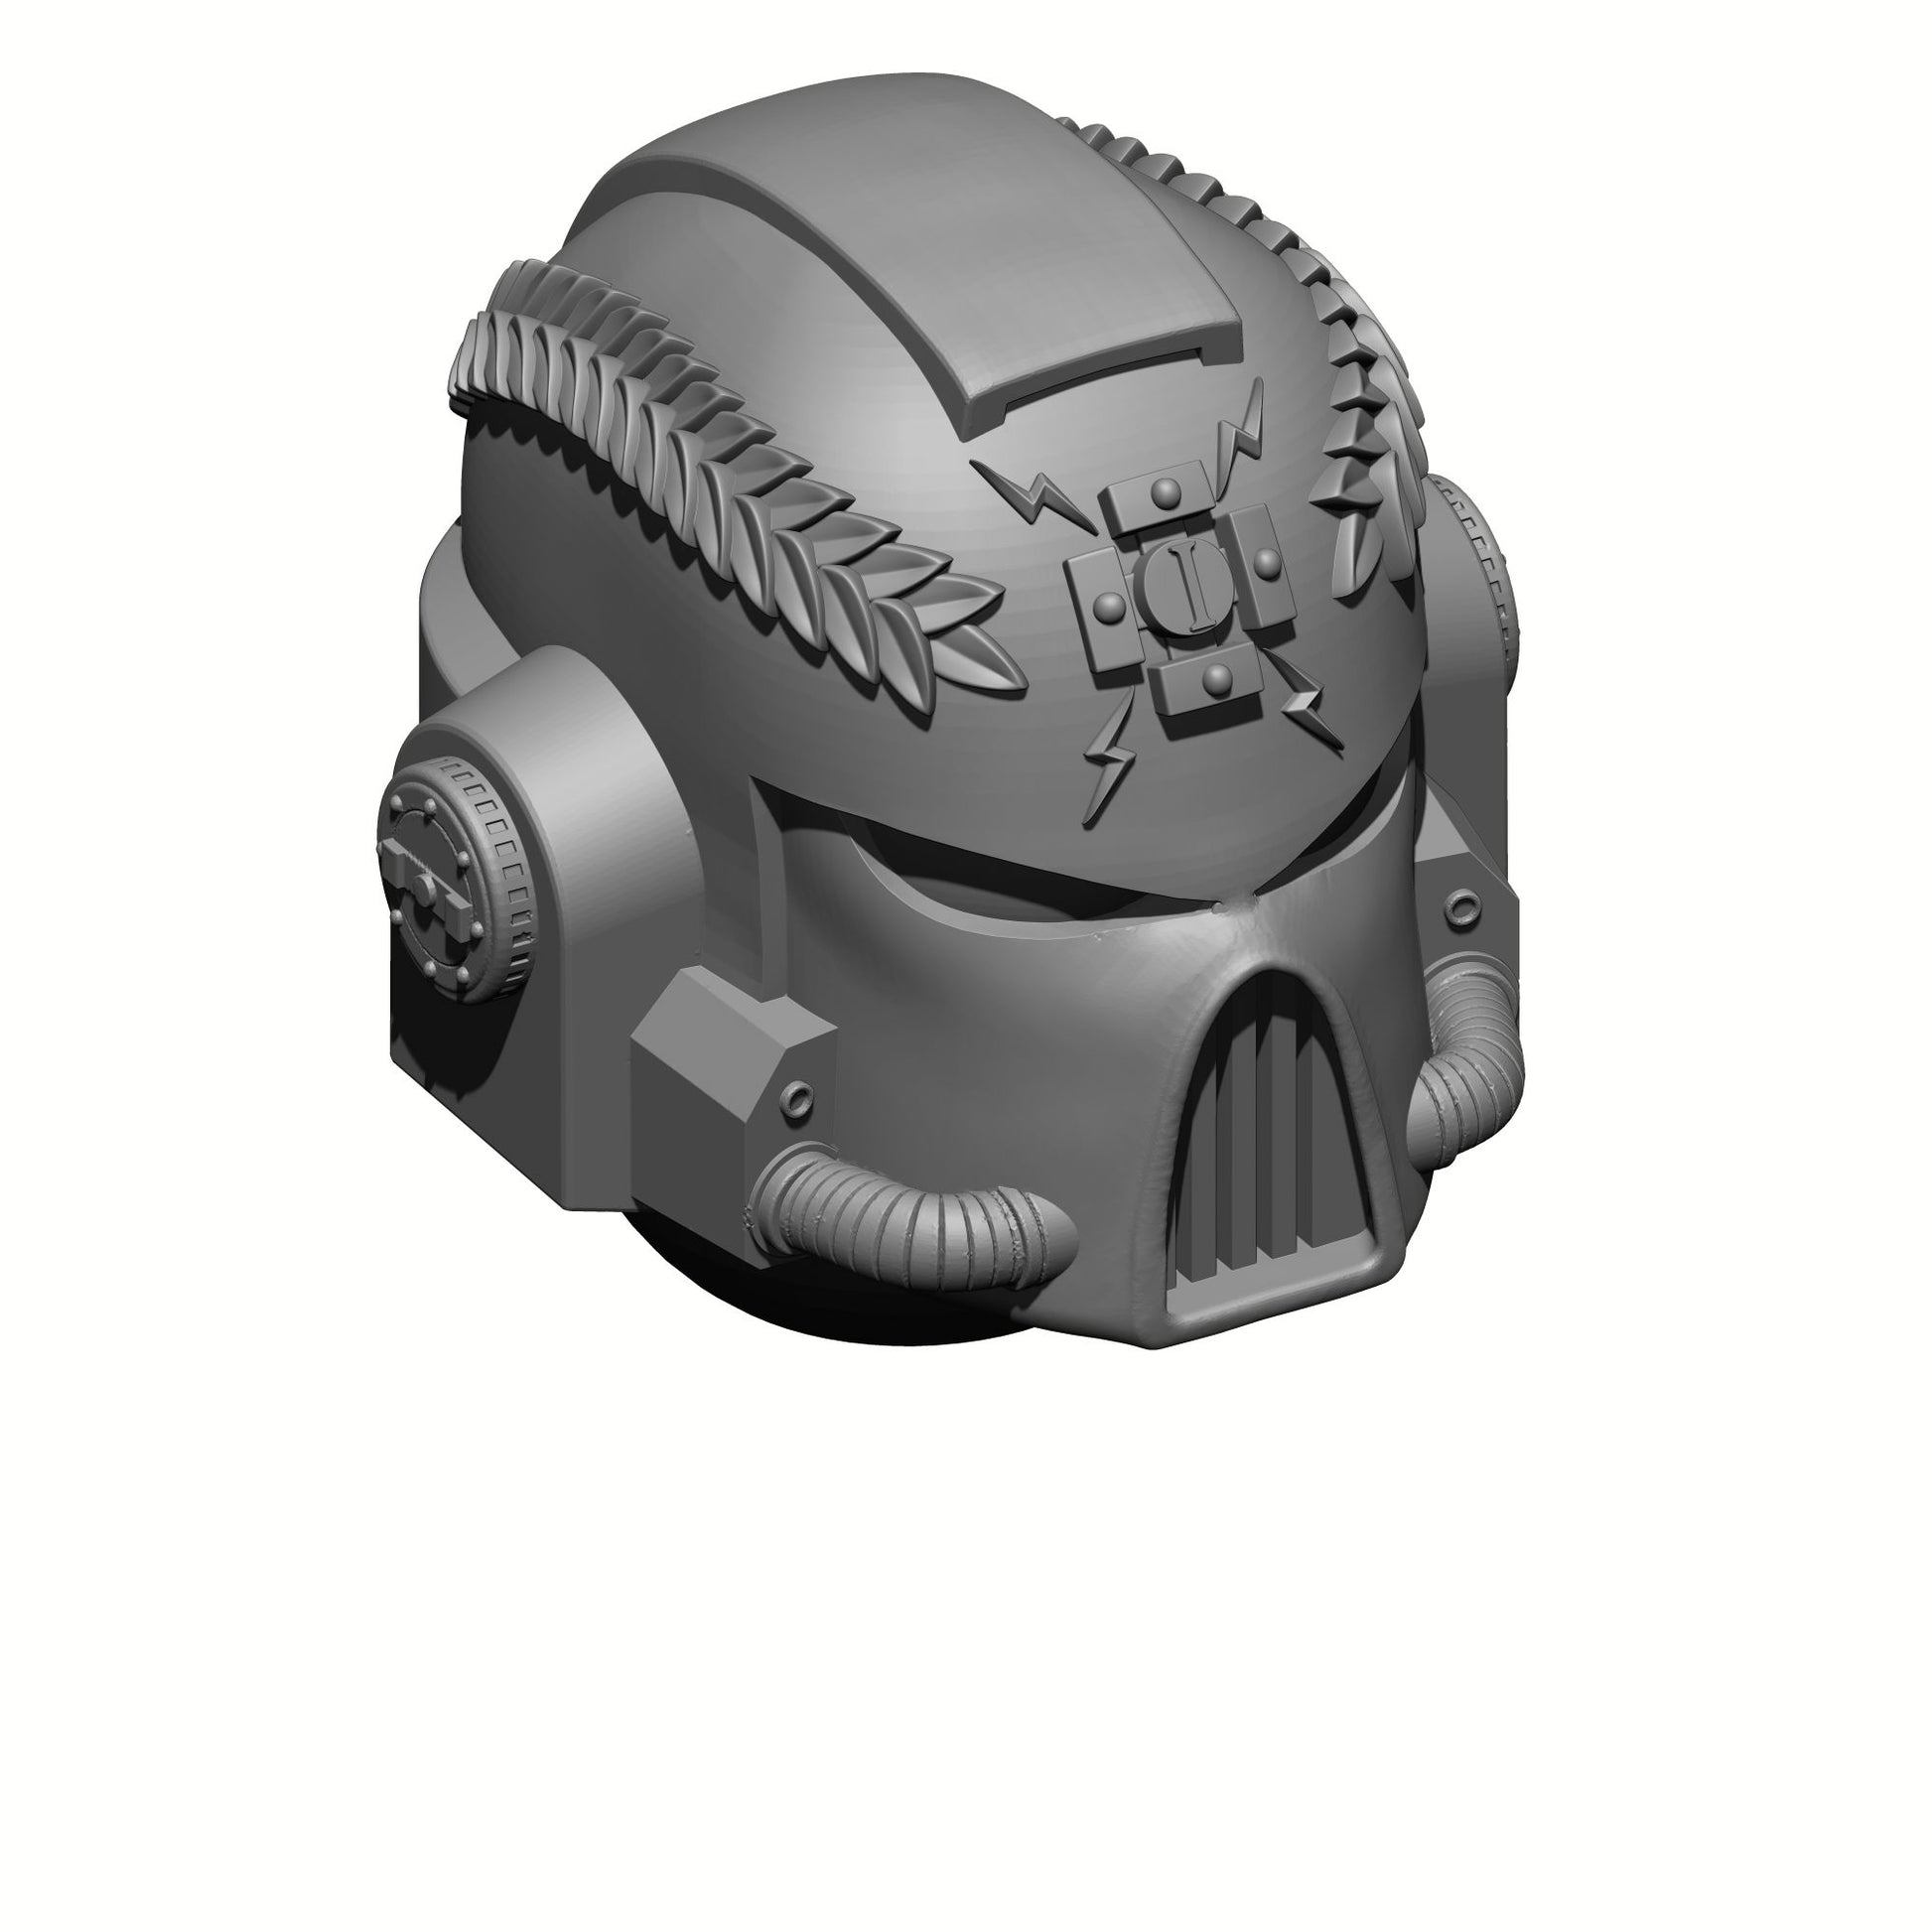 MK VII Helmet with Cross and Laurel Leaves: Helmet Swap for JoyToy Warhammer 40K Compatible Chaos Space Marine 1:18 4" Action Figures by 18th Scale Armory